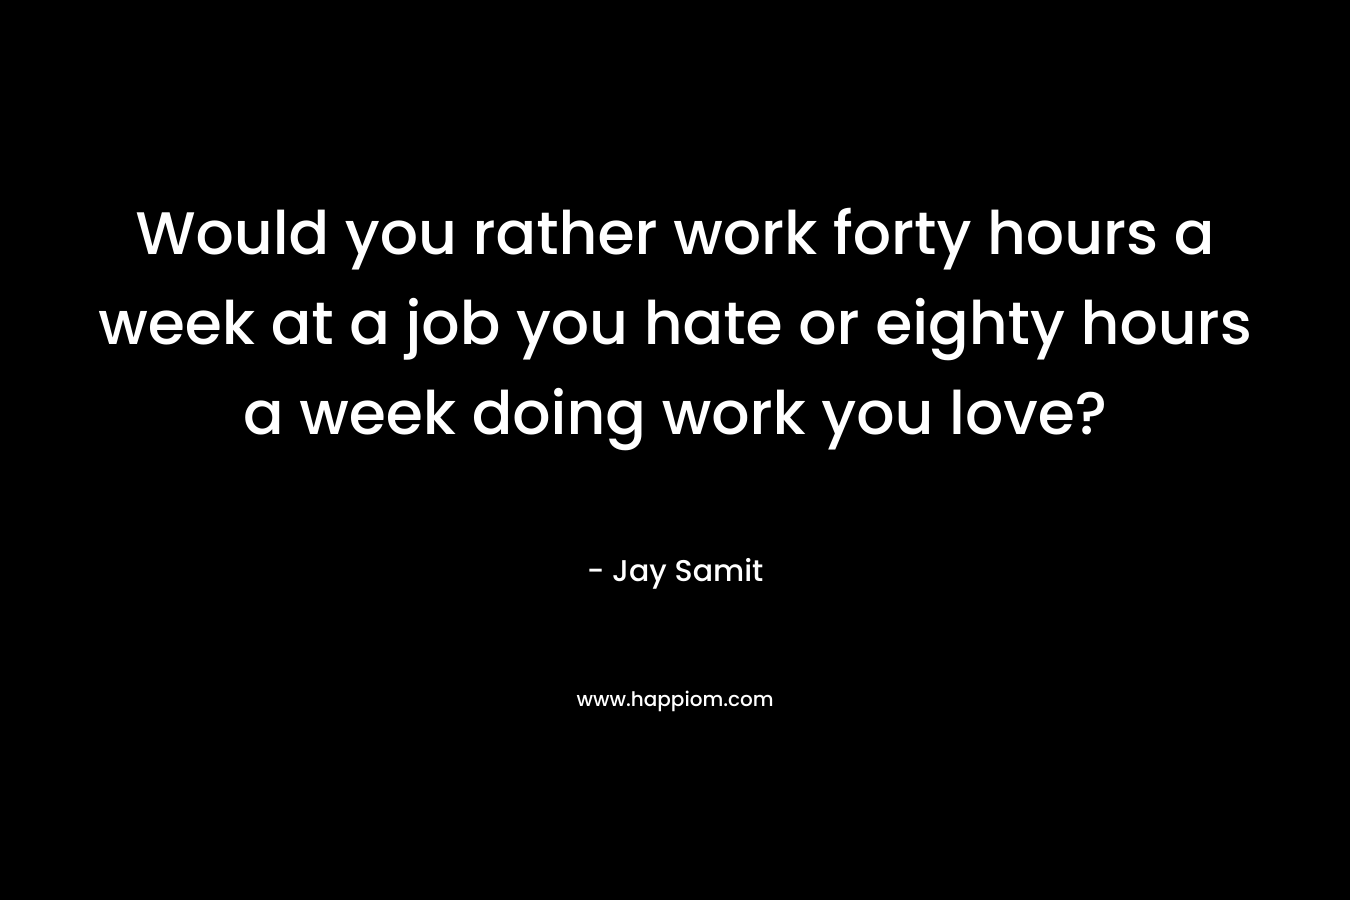 Would you rather work forty hours a week at a job you hate or eighty hours a week doing work you love? – Jay Samit